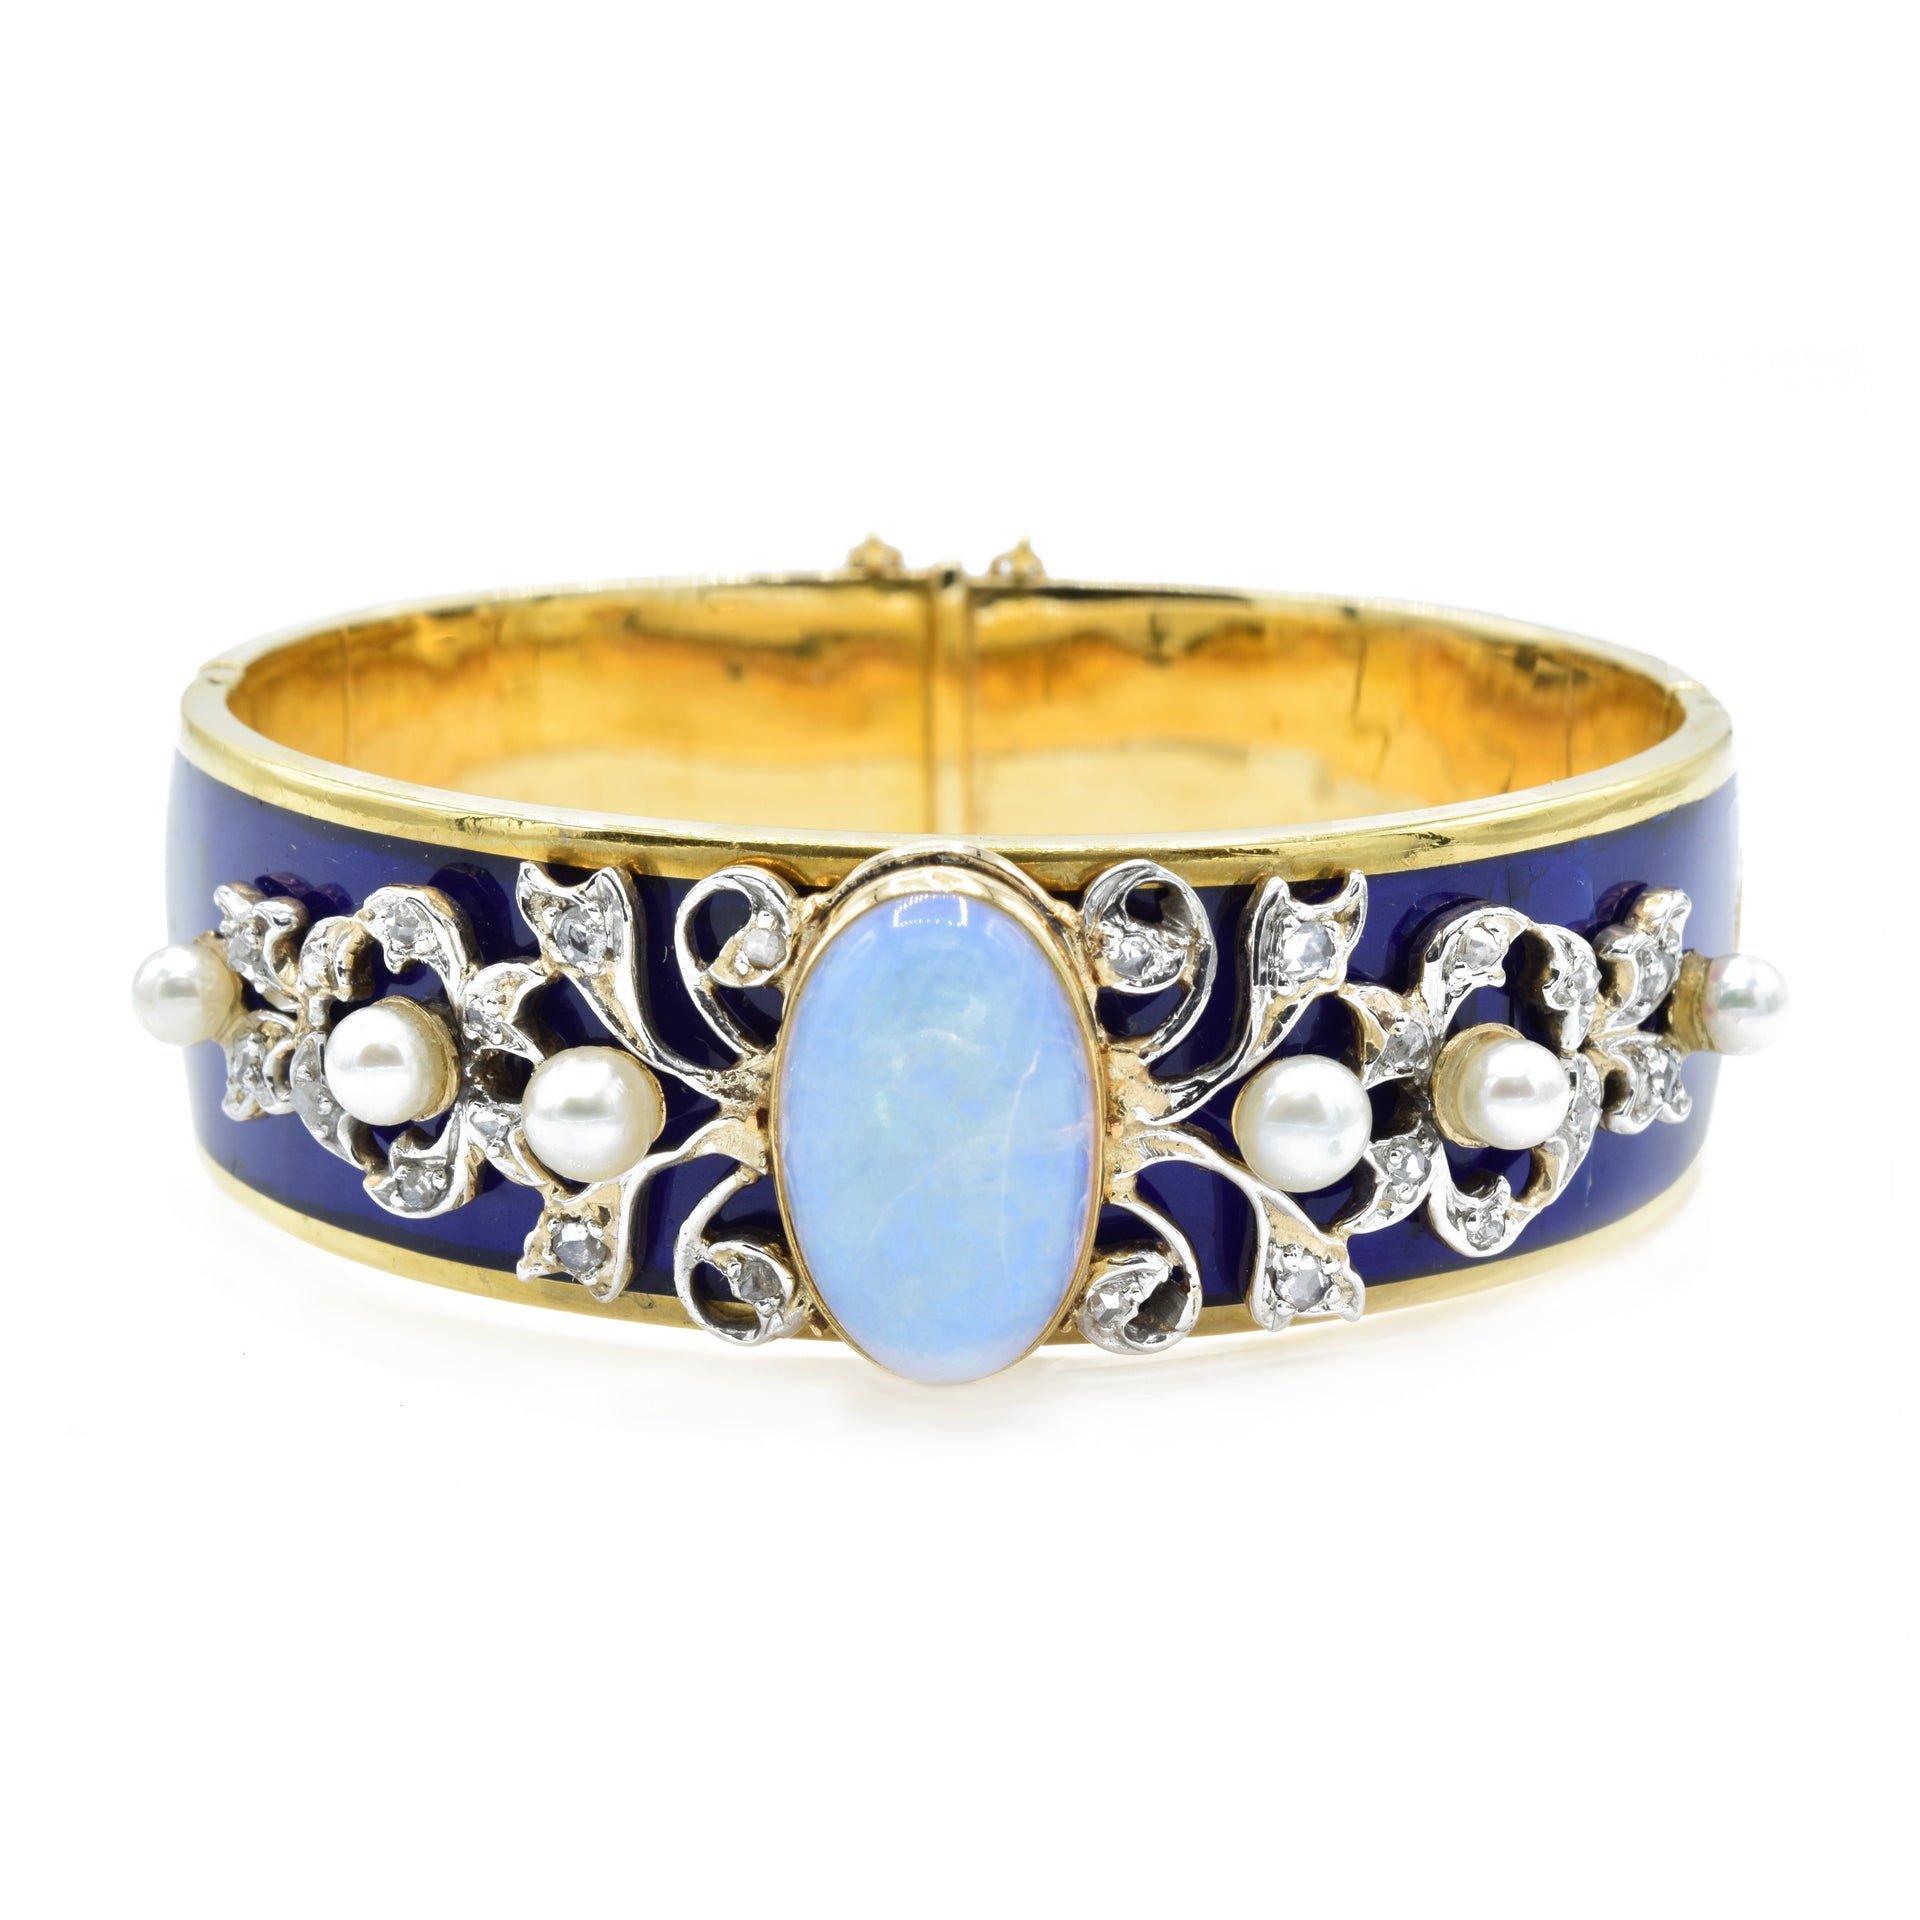 Antique 22KT Yellow Gold Opal Enamel Diamond And Pearl Bangle